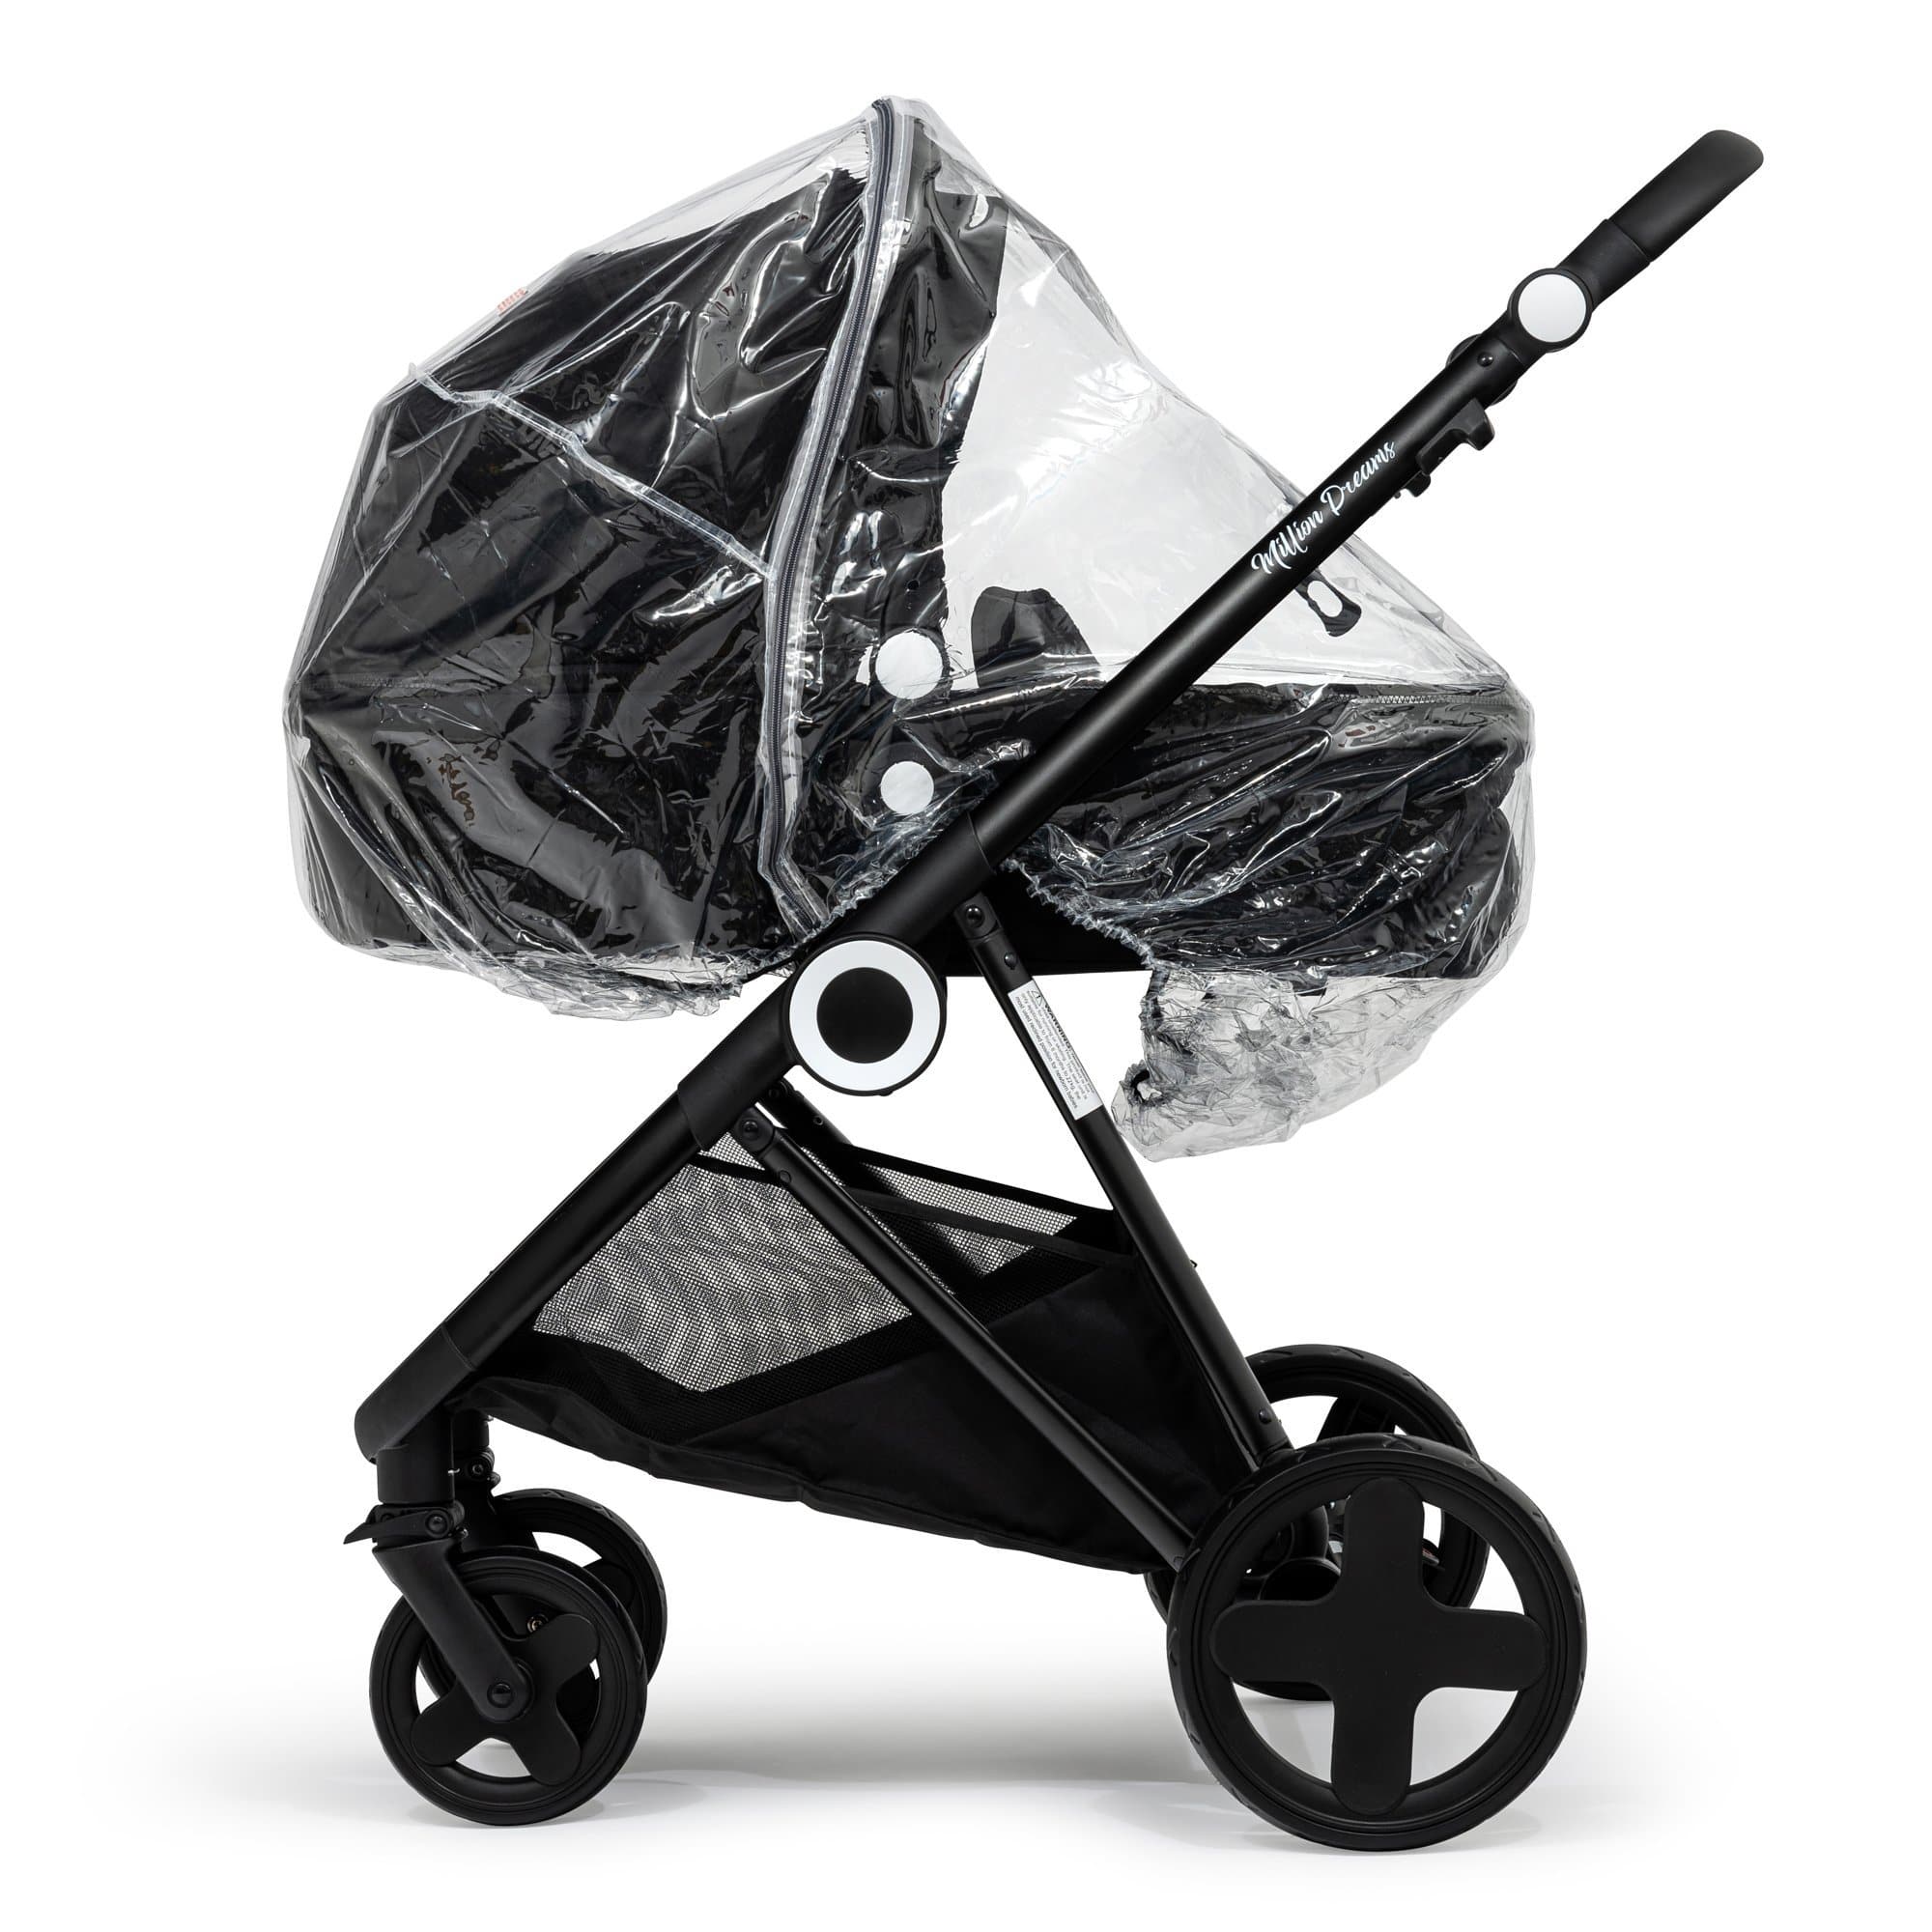 2 in 1 Rain Cover Compatible with Bebecar - Fits All Models - For Your Little One